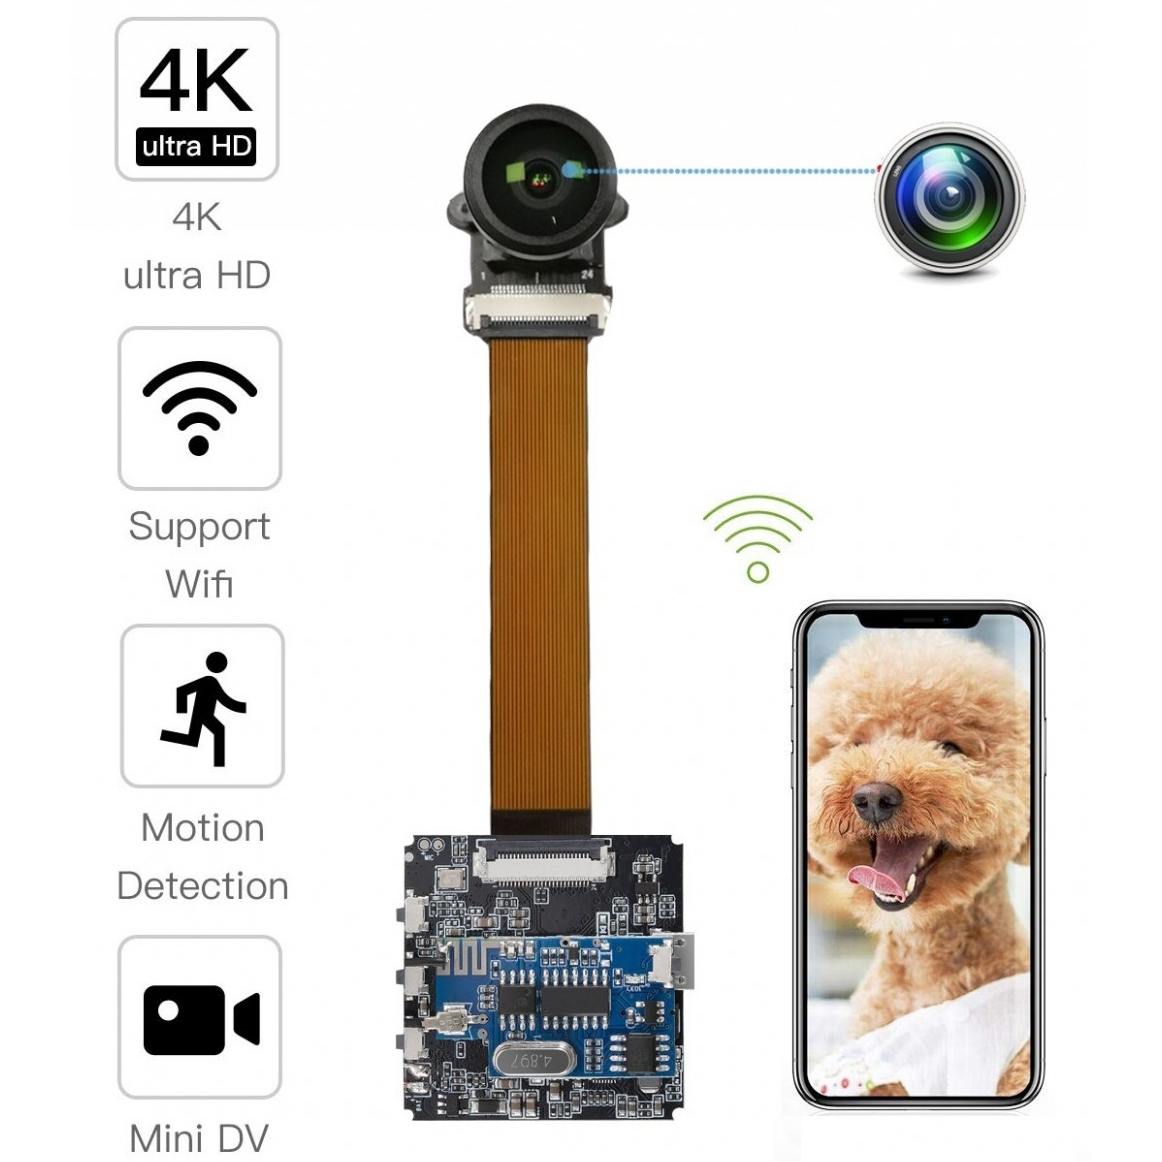 Reasonable priceEHOMFUL SPY CAMERA-
 4K Real Ultra HD DIY Wireless Camera Big Wide Angle 6CM Mini DVR Motion Detection Nanny Cam Security System APP Control Action Camera up to 400GB – MATECAM